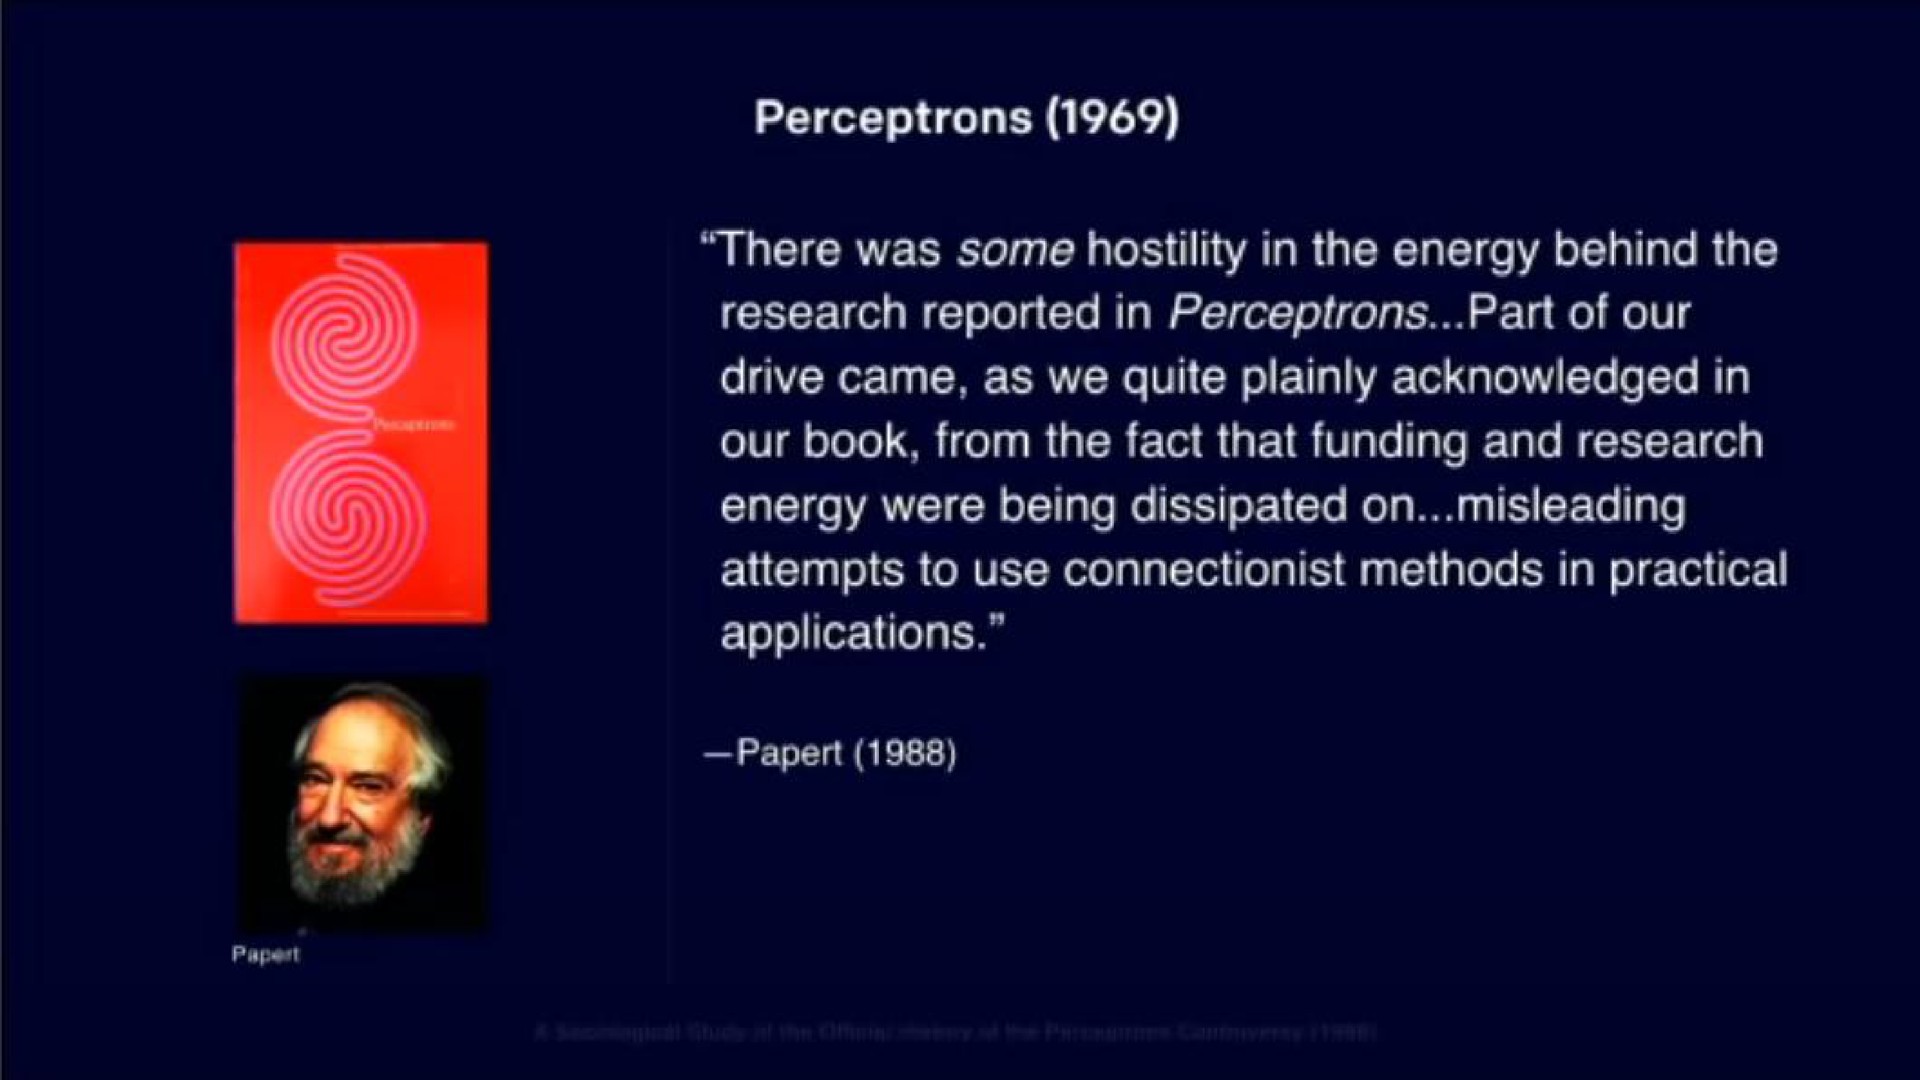 there was some hostility in the energy behind the research reported in part of our drive came as we quite plainly acknowledged in our book from the fact that funding and research energy were being dissipated on misleading attempts to use methods in practical applications | OpenAI